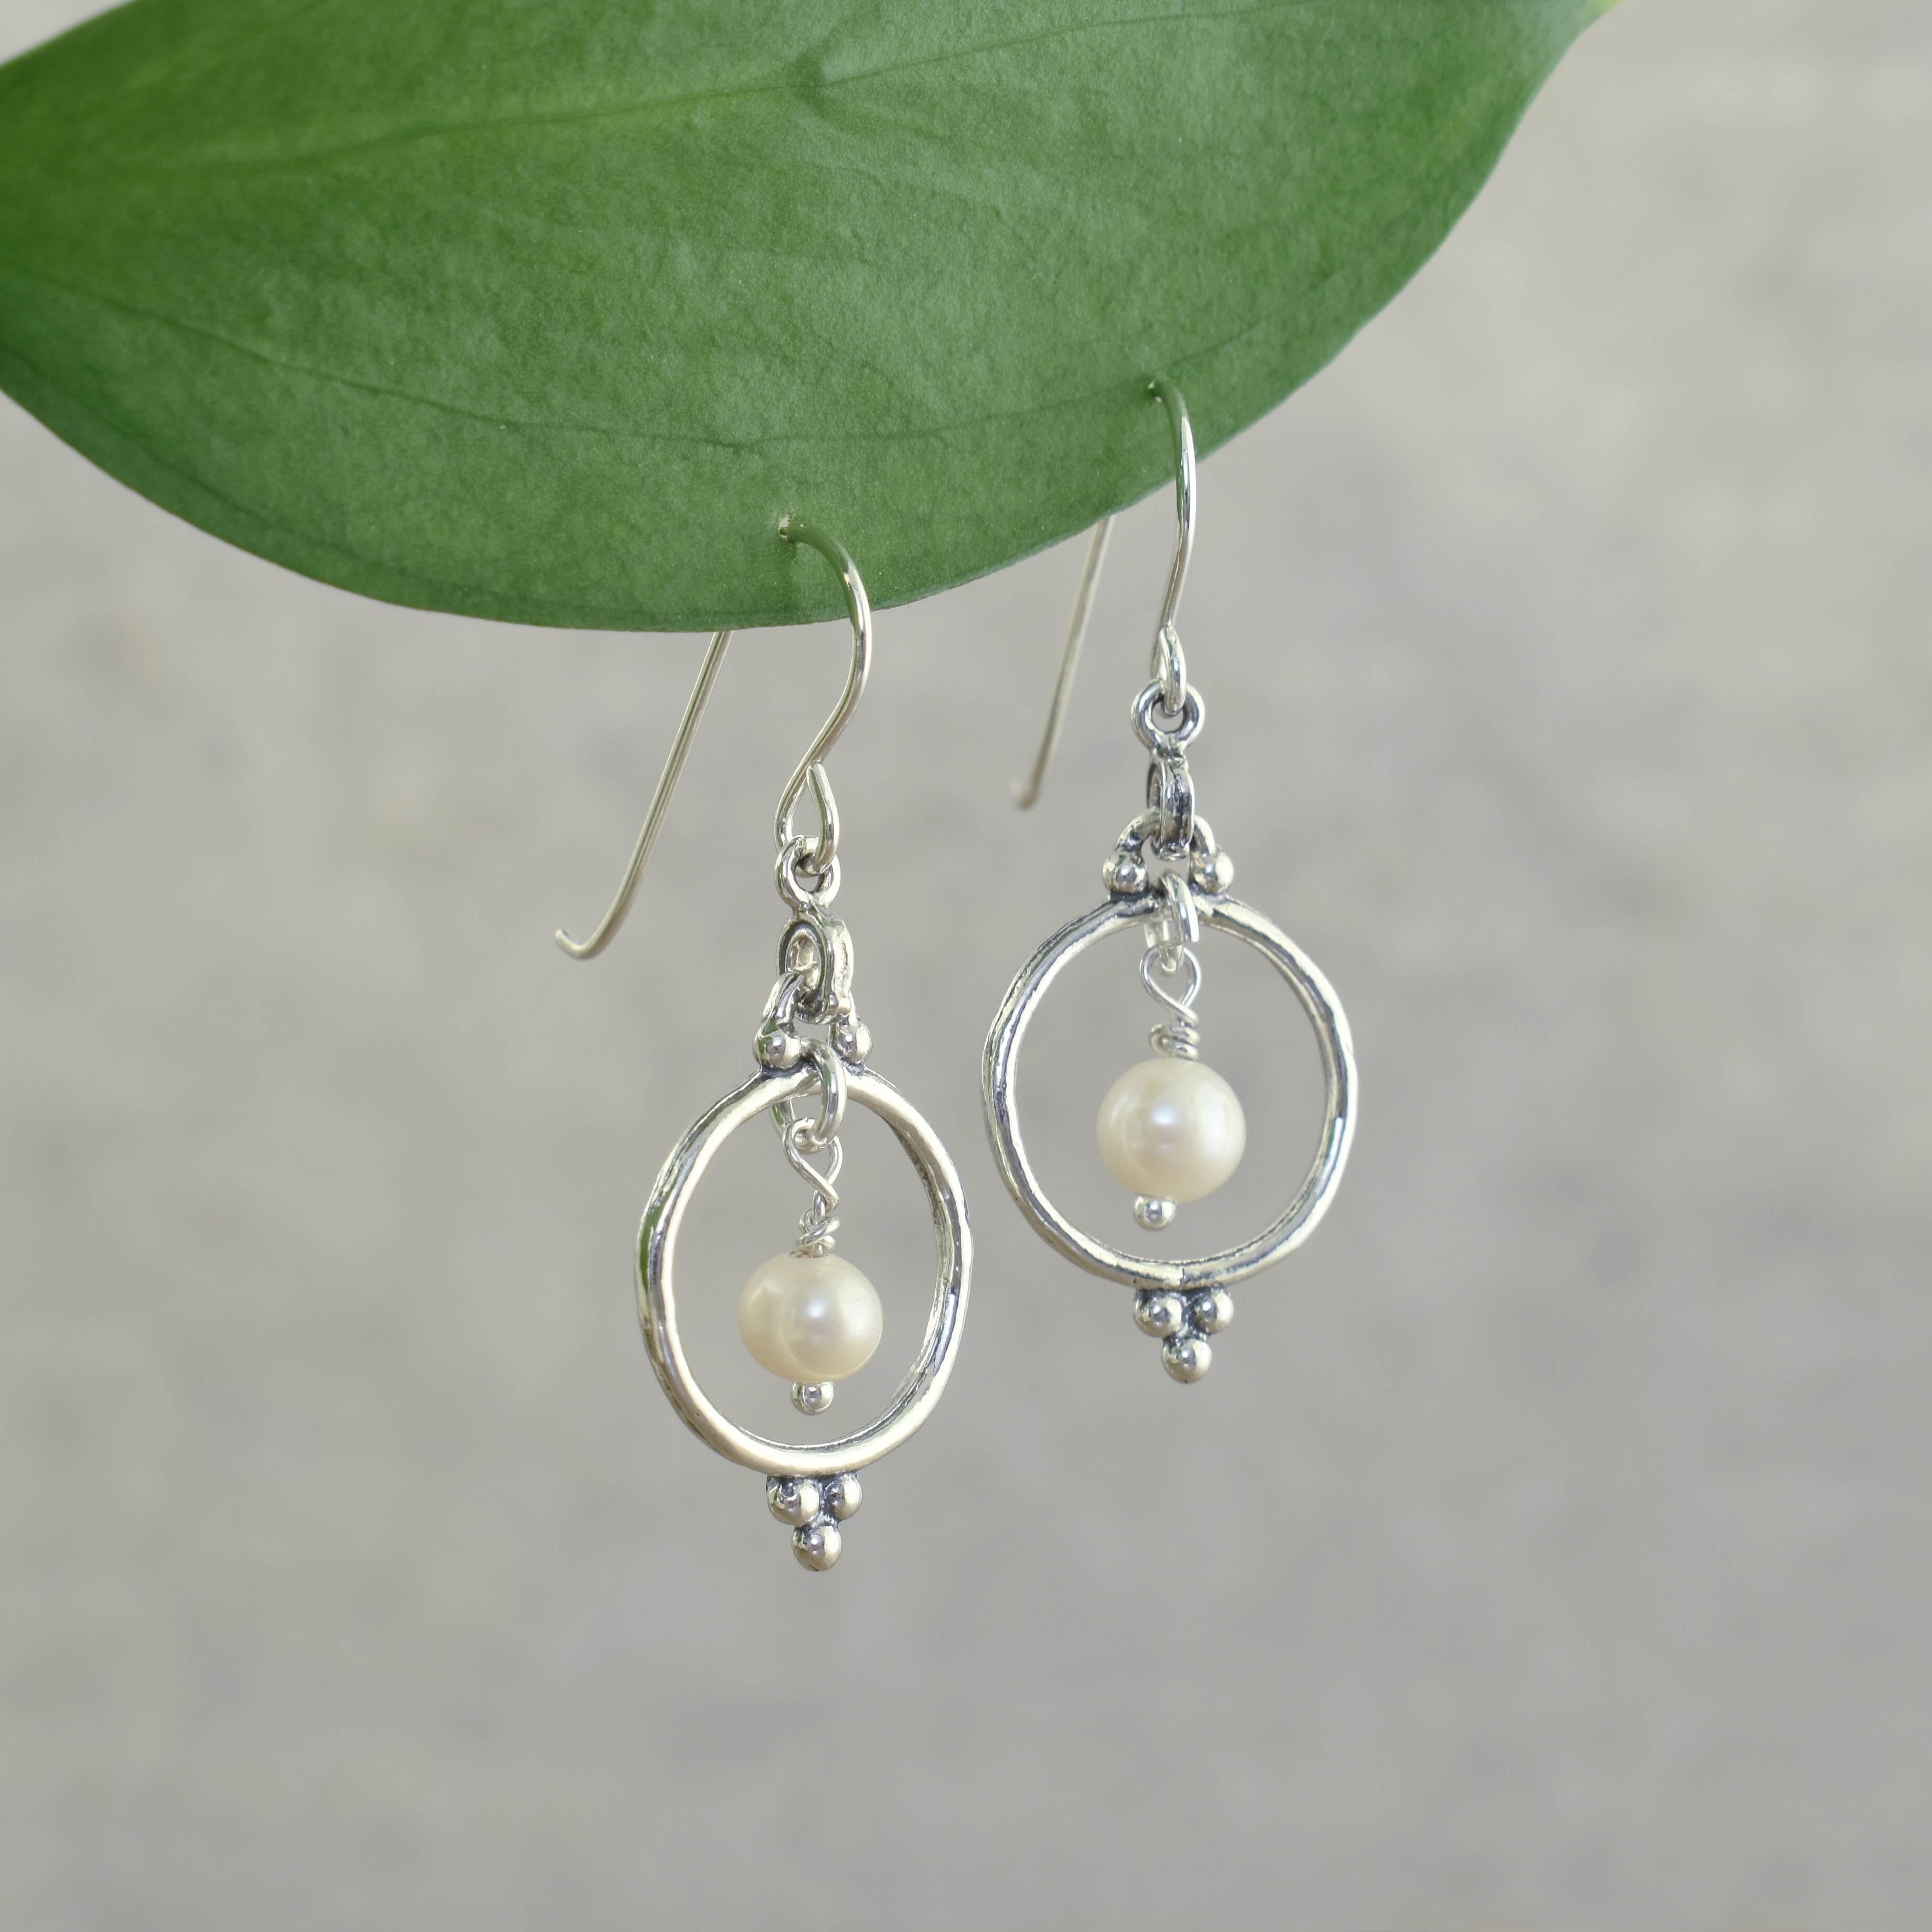 Handcrafted .925 sterling silver earrings with pearl dangle